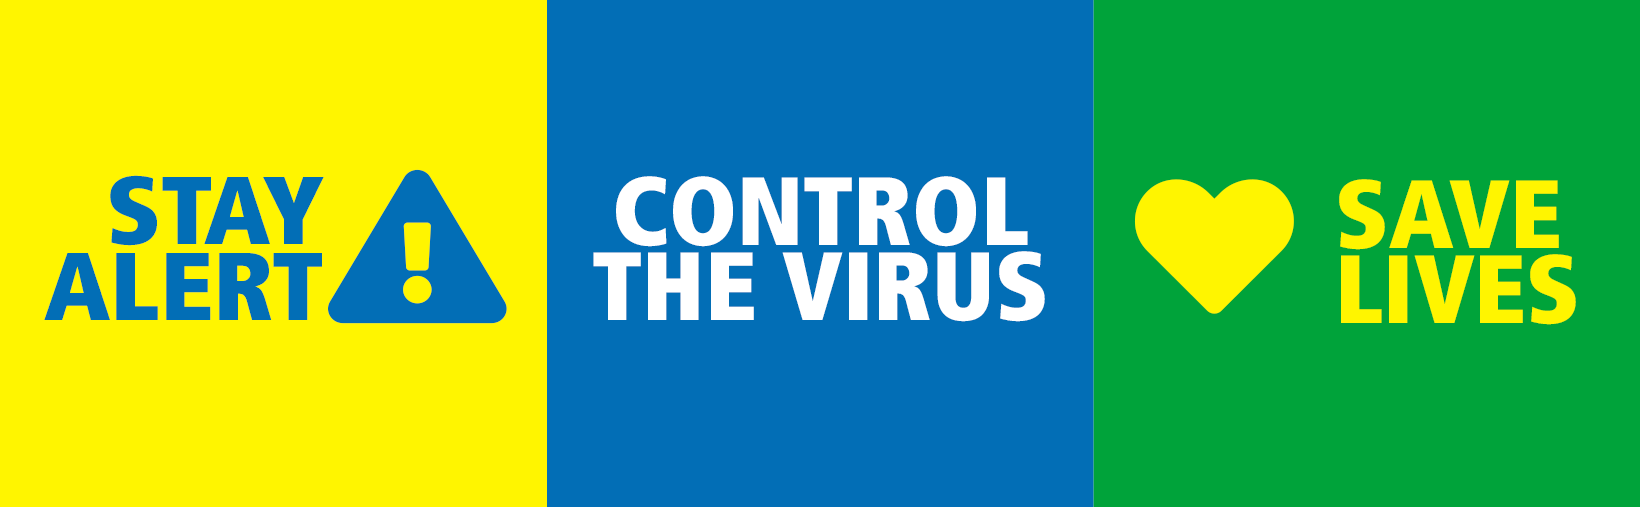 Stay Alert Control The Virus Save Lives